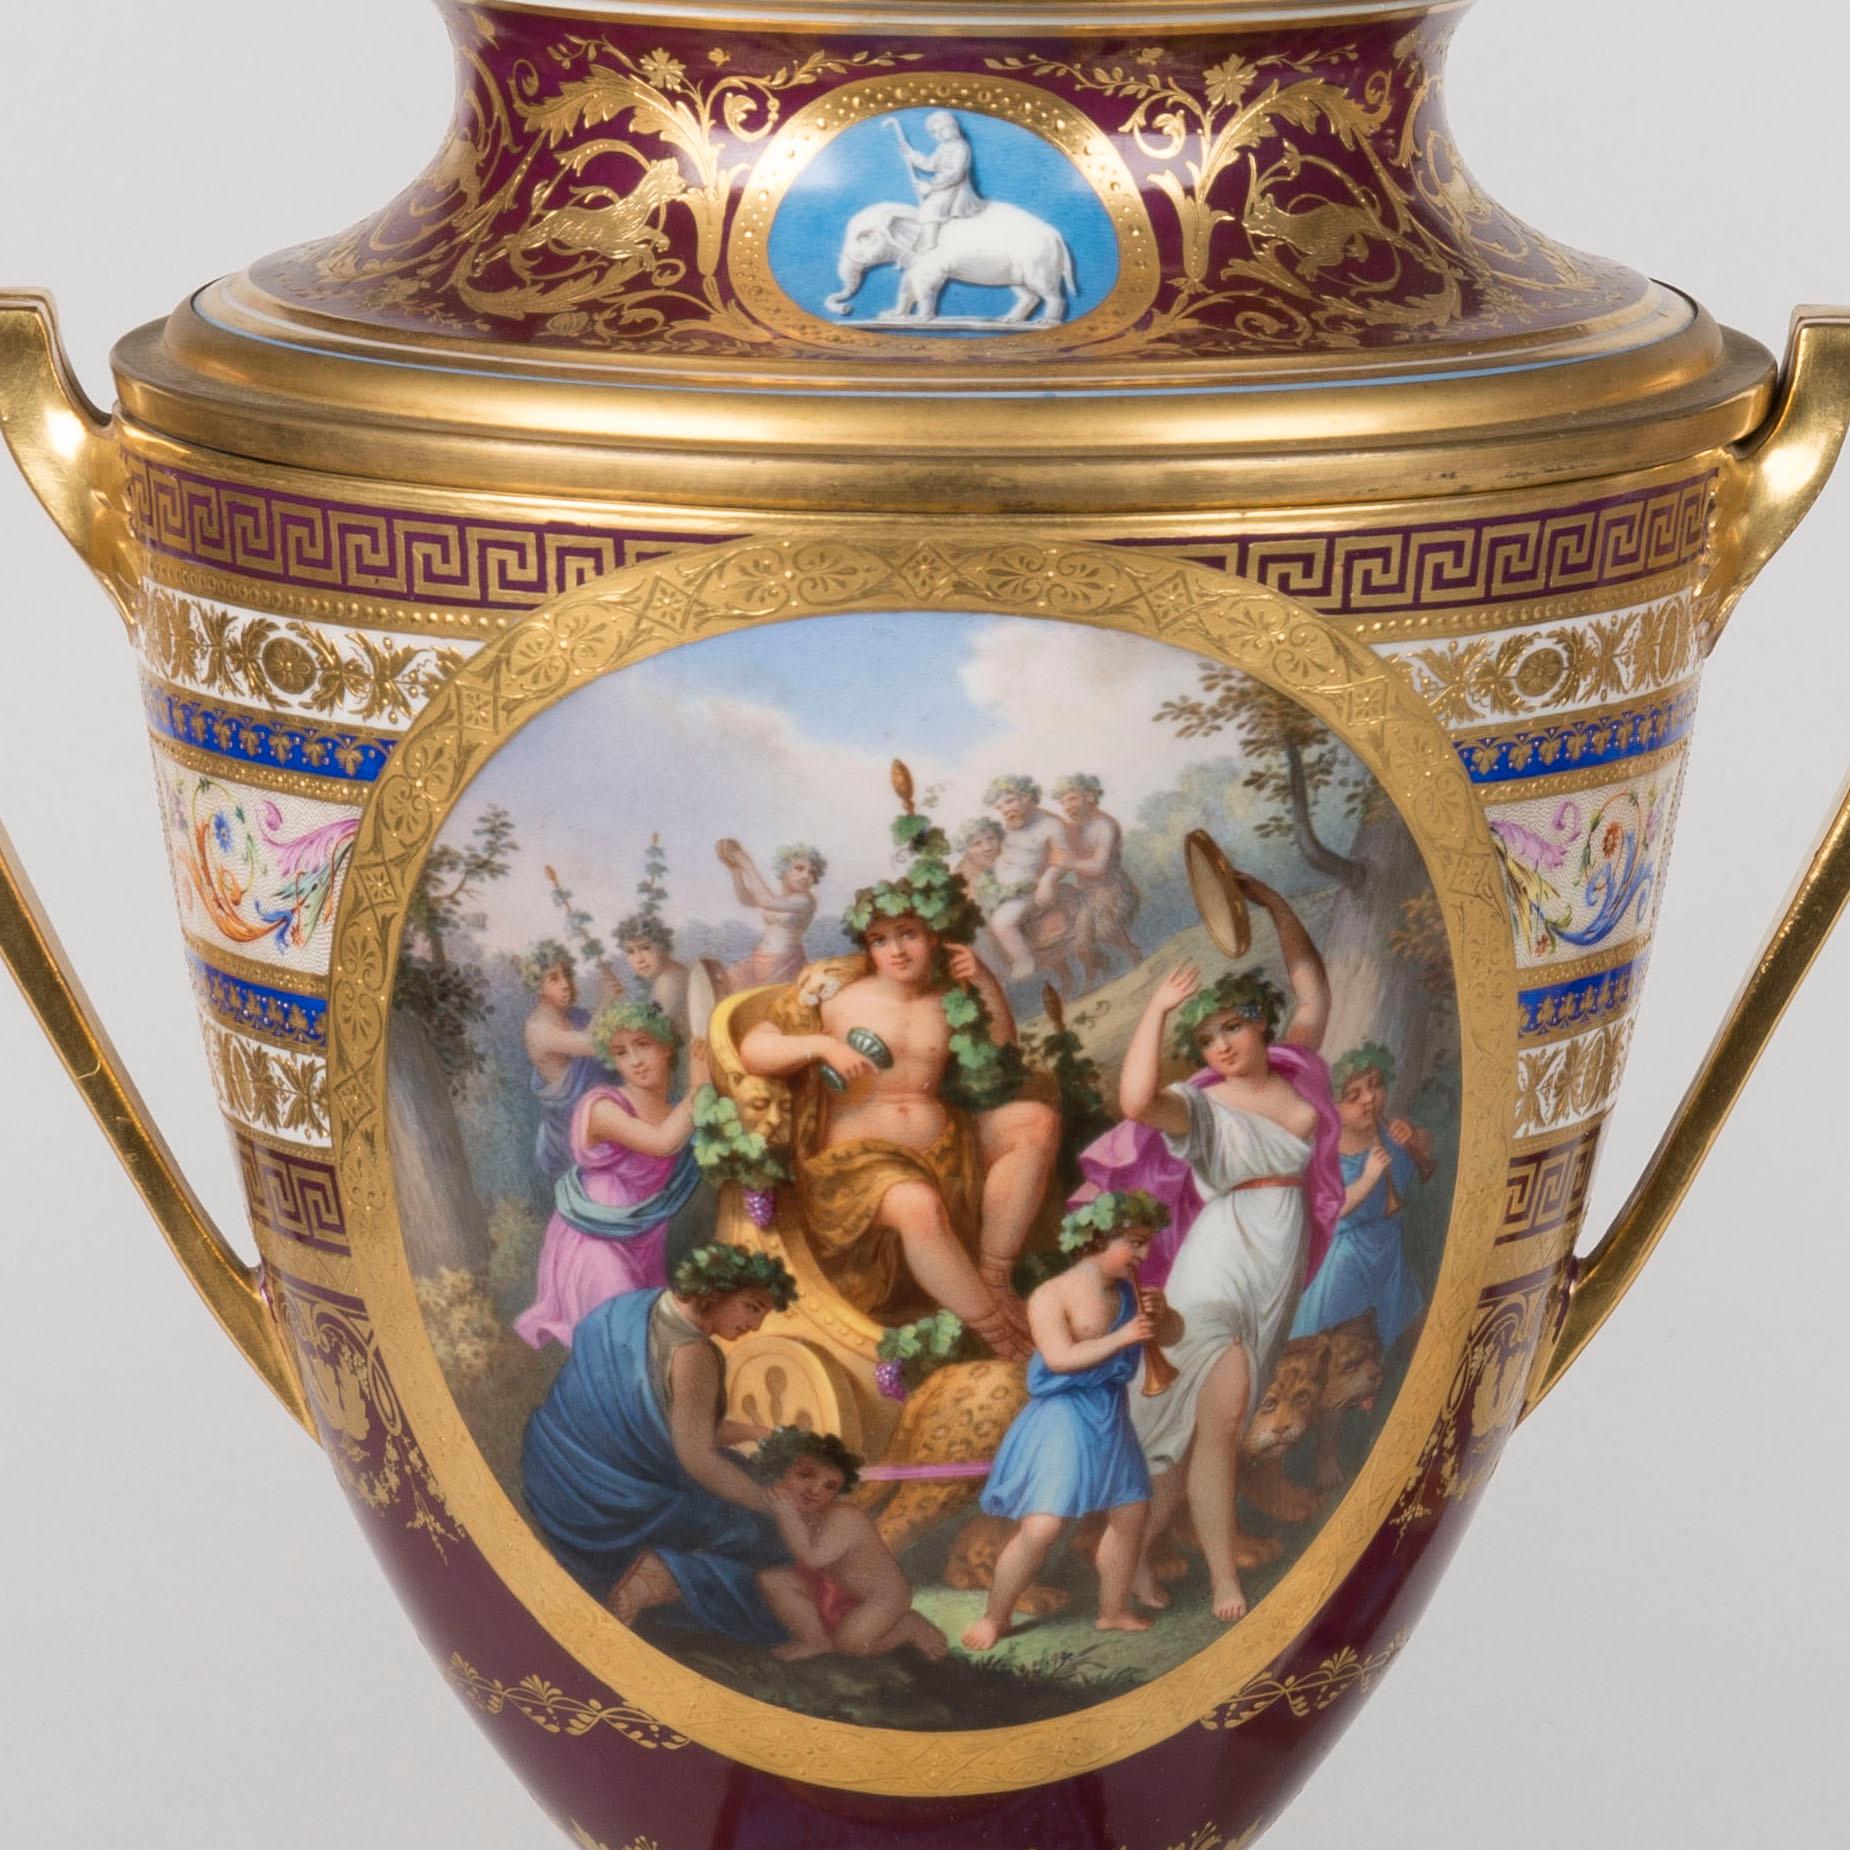 Rare 19th Century Viennese Porcelain Hand-Painted Ice Cream Pail Vases For Sale 2